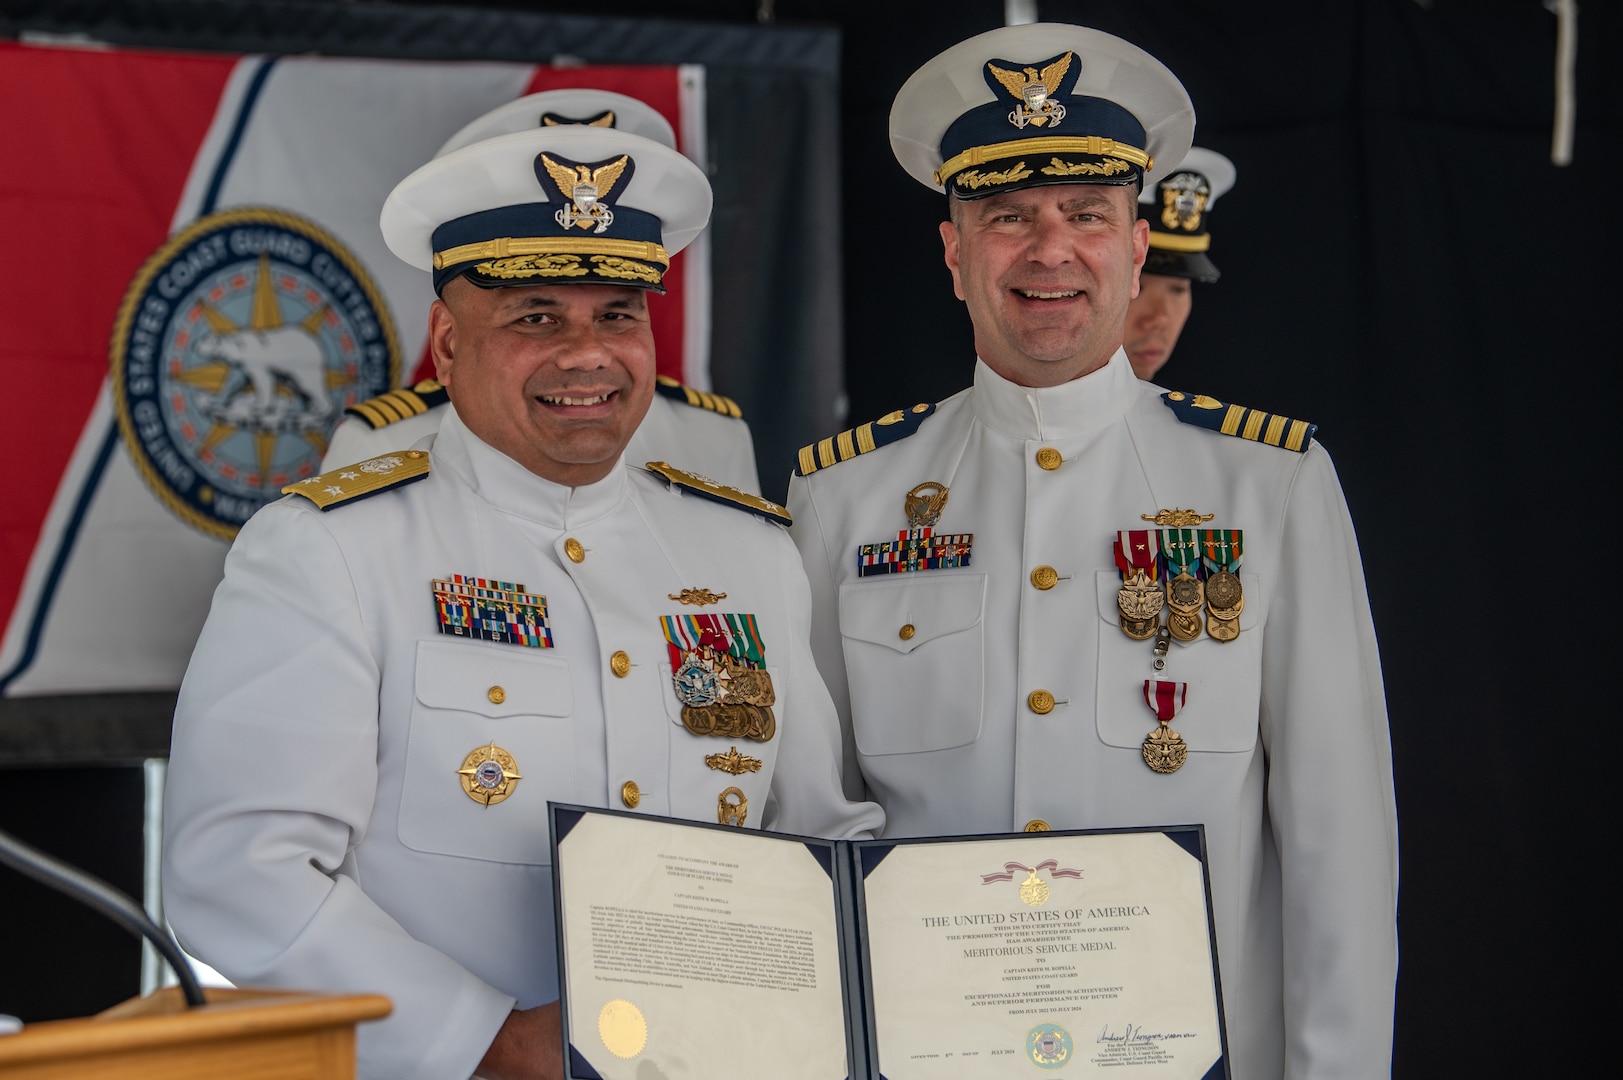 U.S. Coast Guard Capt. Keith M. Ropella receives the Meritorious Service Medal from Vice Adm. Andrew Tiongson who is holding the written award in front of both of them.